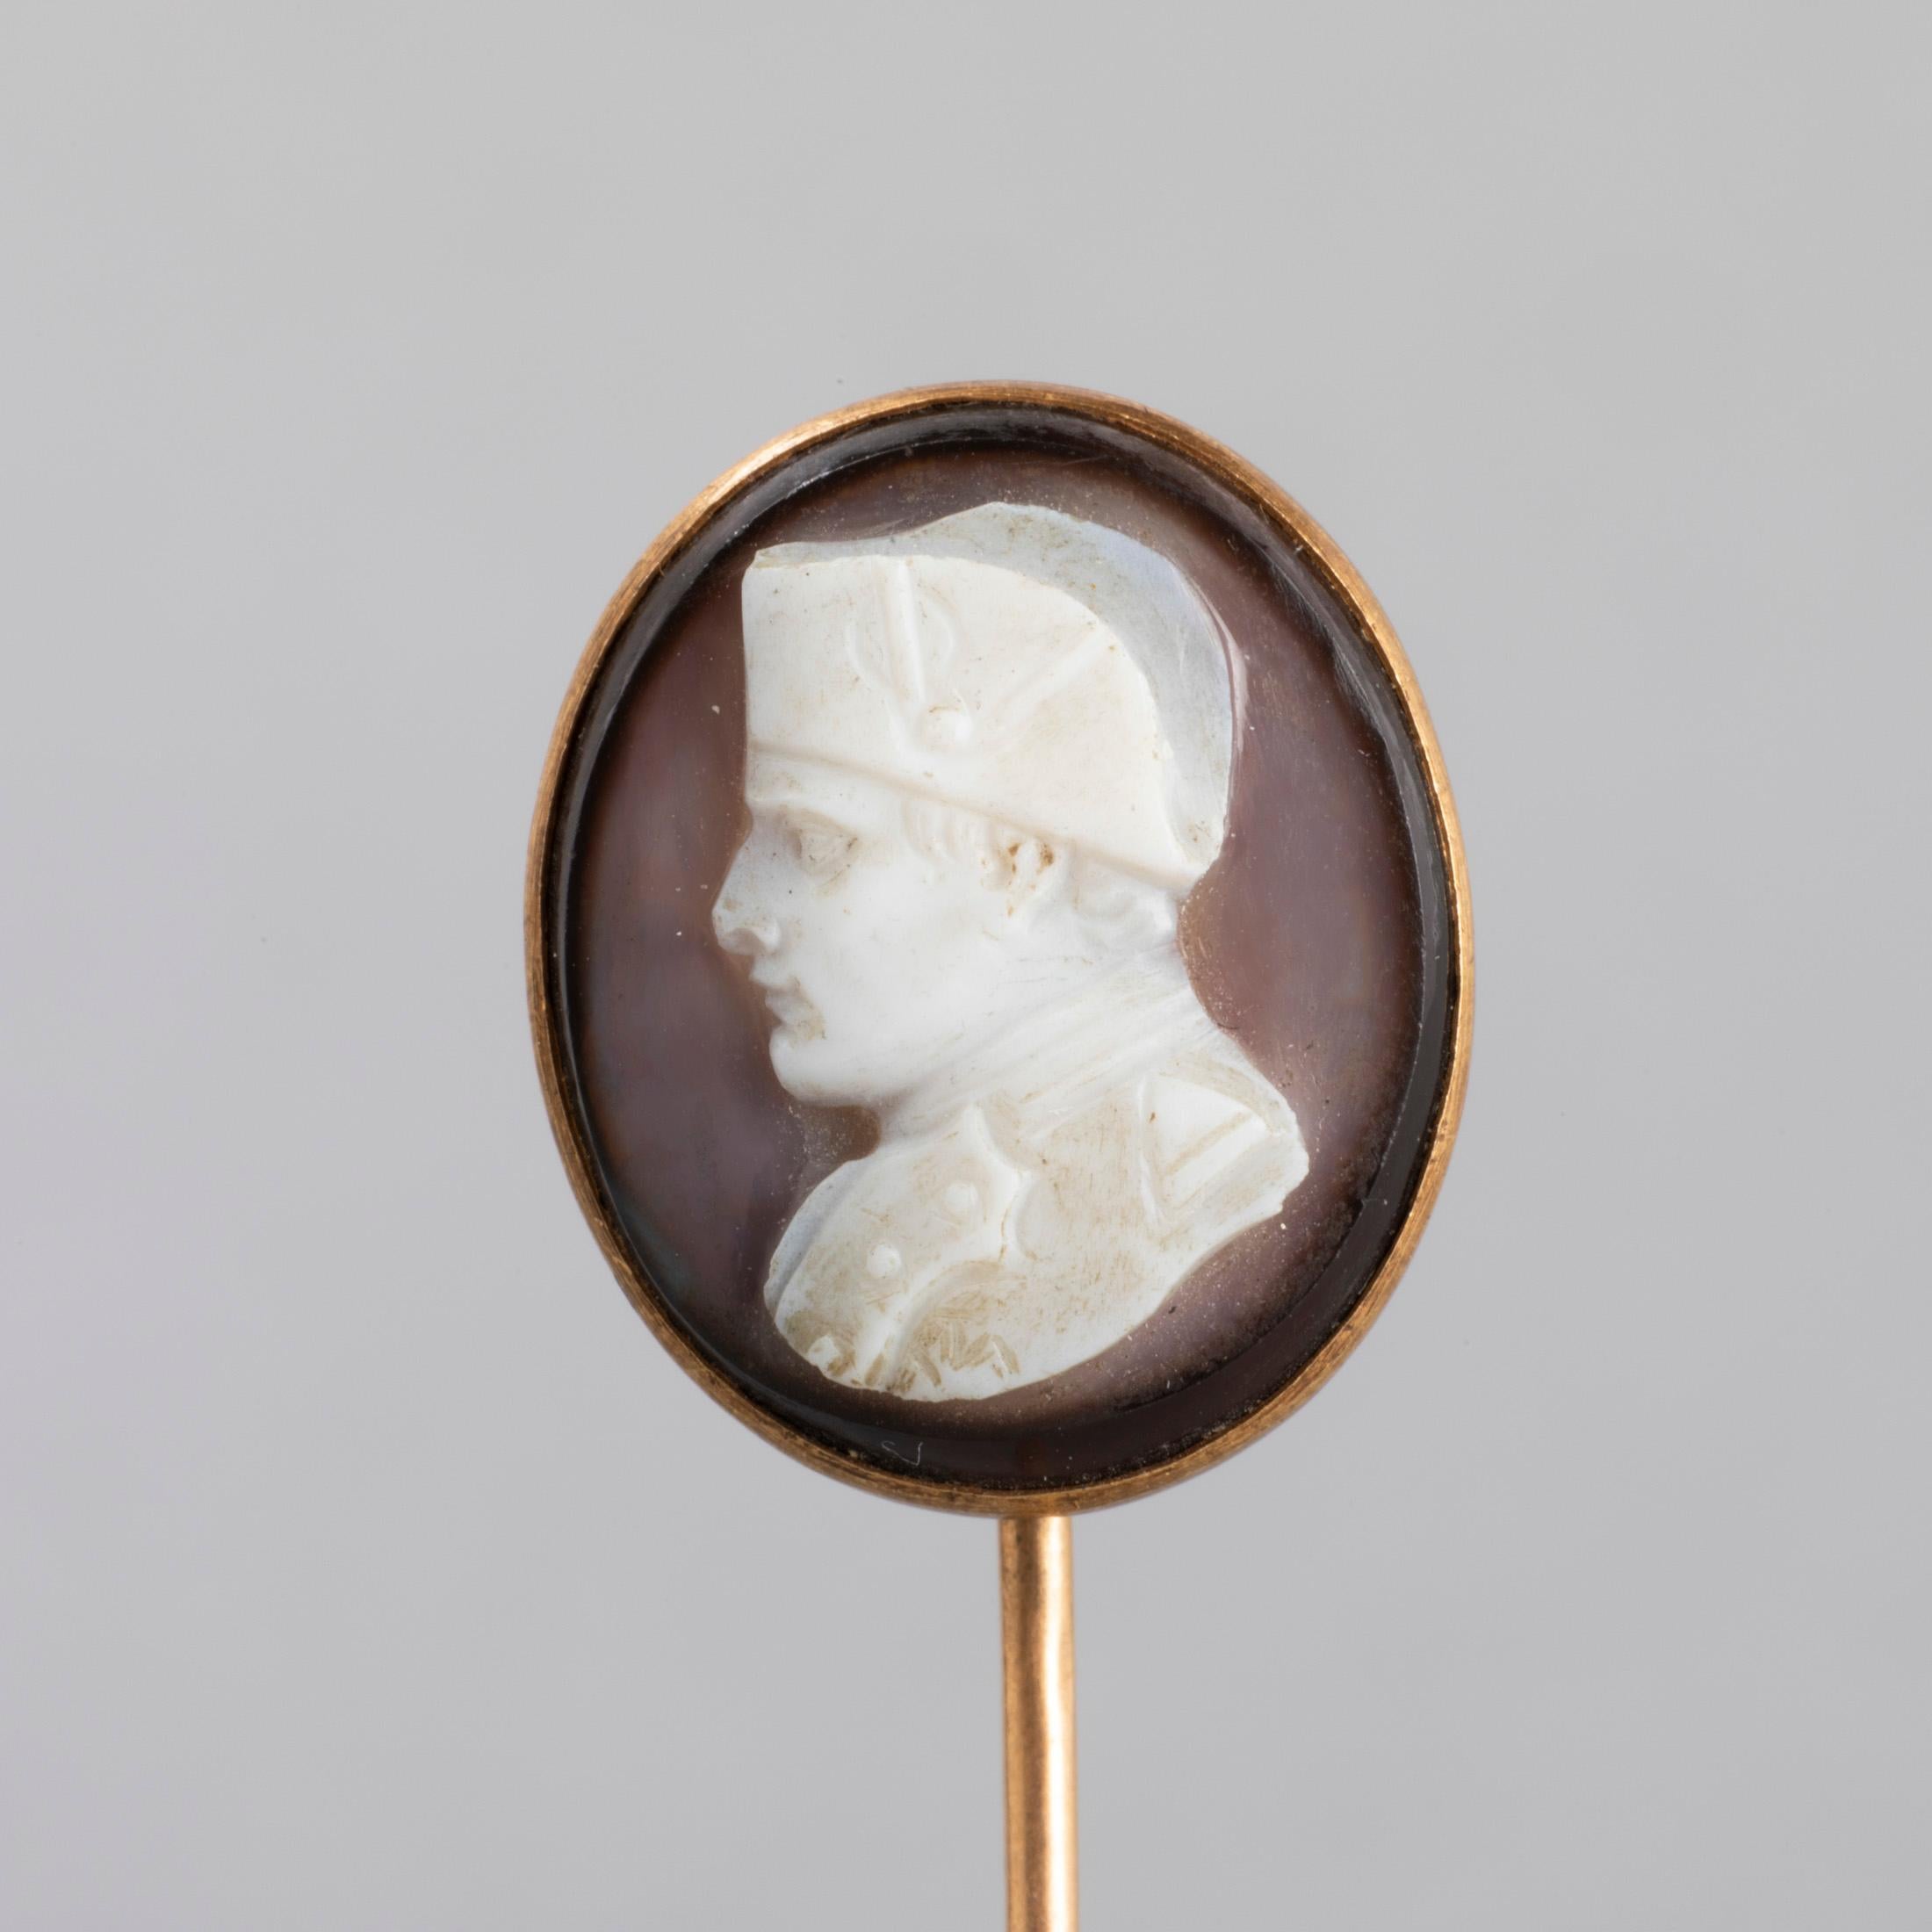 Antique Napoleon Cameo Pin From Maréchal MacDonald Estate

This is a rare and Historical piece, representing the profile of Napoleon Bonaparte. Made with two colours Agate stone. 
The metal is 18k gold.
Made In France in the early 19th century.
It